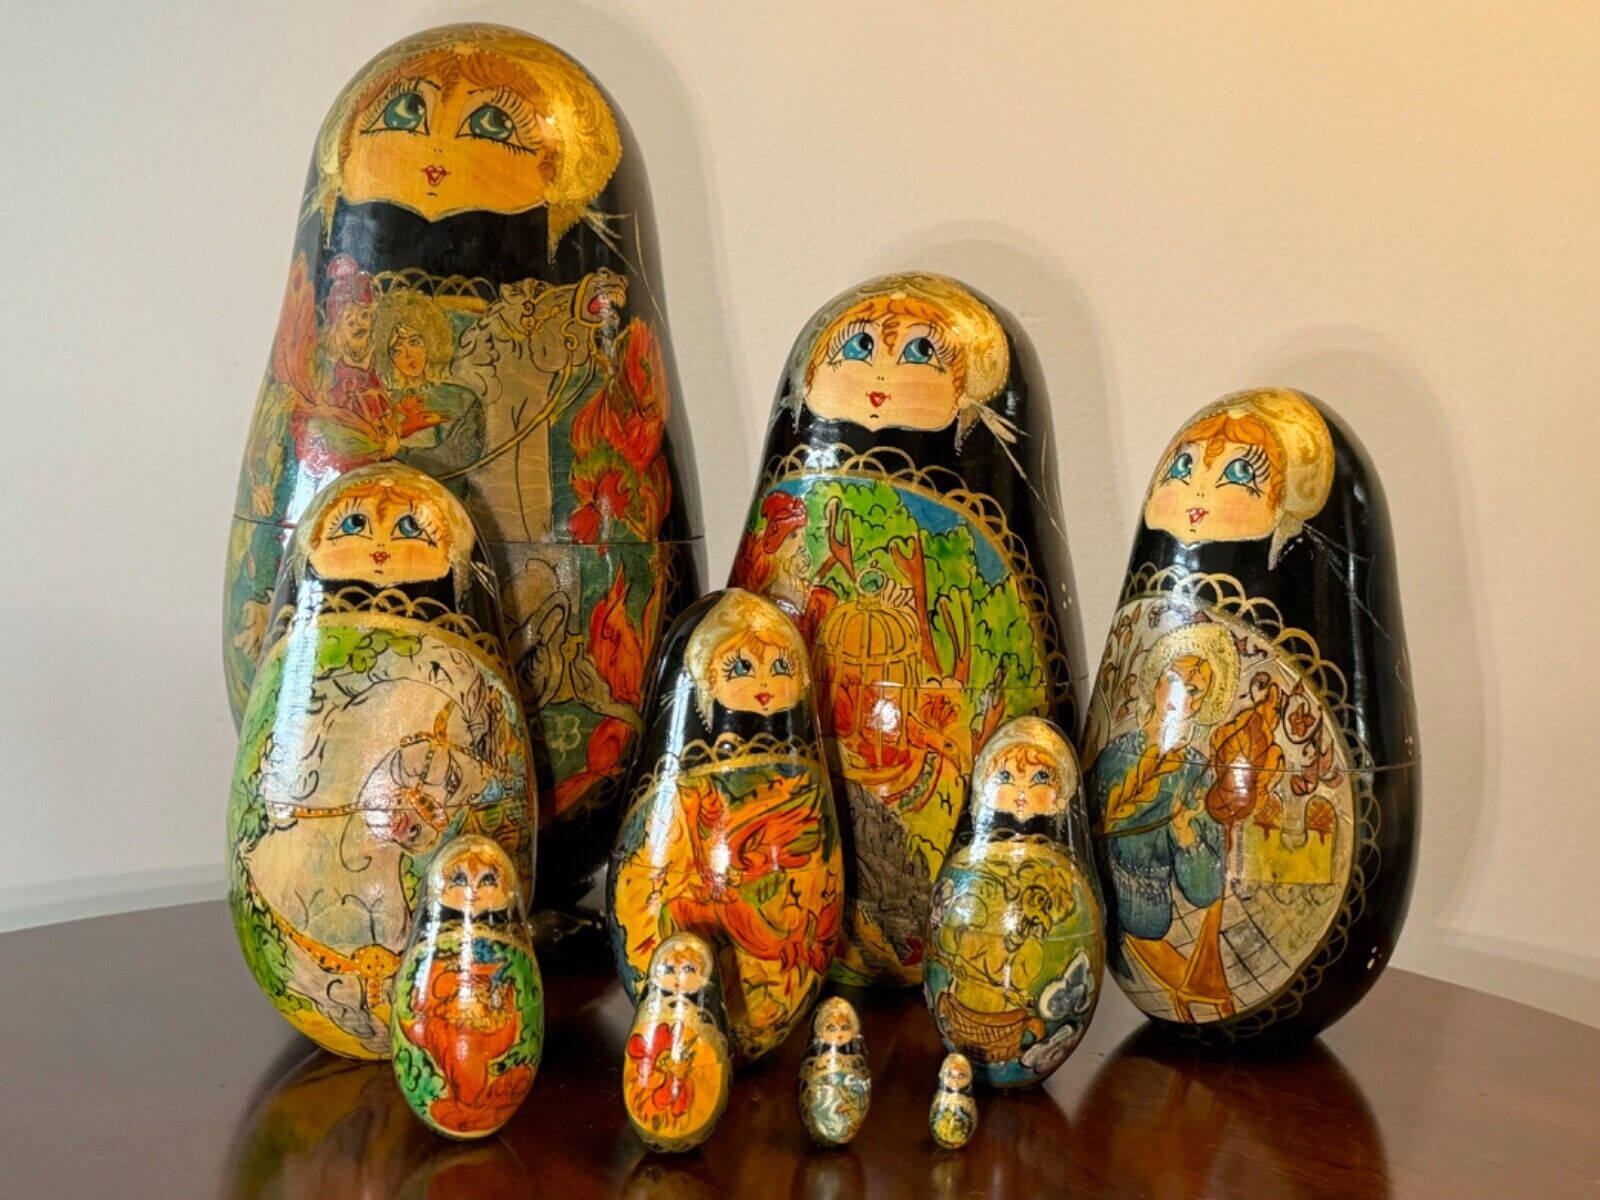 VTG RUSSIAN MATRYOSHKA NESTING DOLLS 10 Pieces, Signed & Hand Painted, GOOD COND